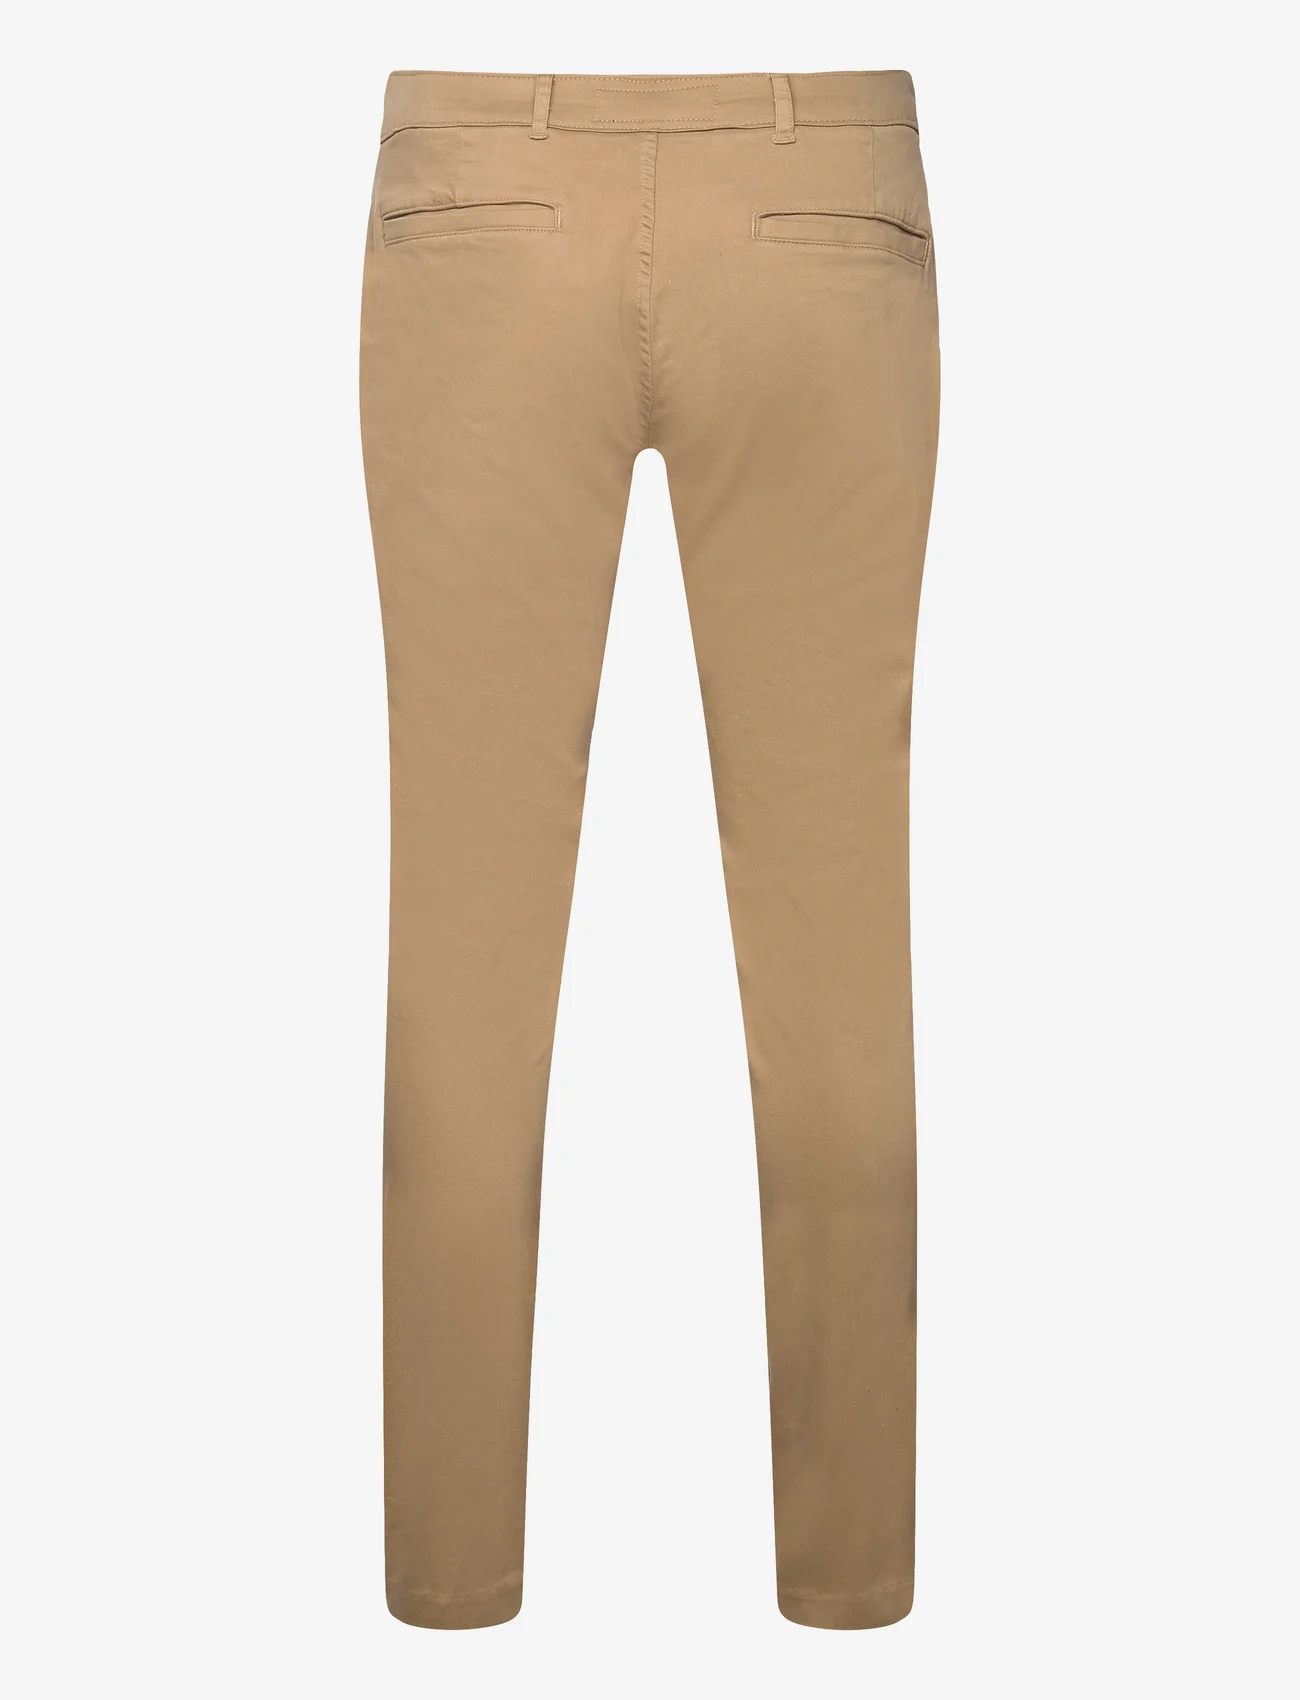 Abercrombie & Fitch - ANF MENS PANTS - chinos - kelp 475 - 1